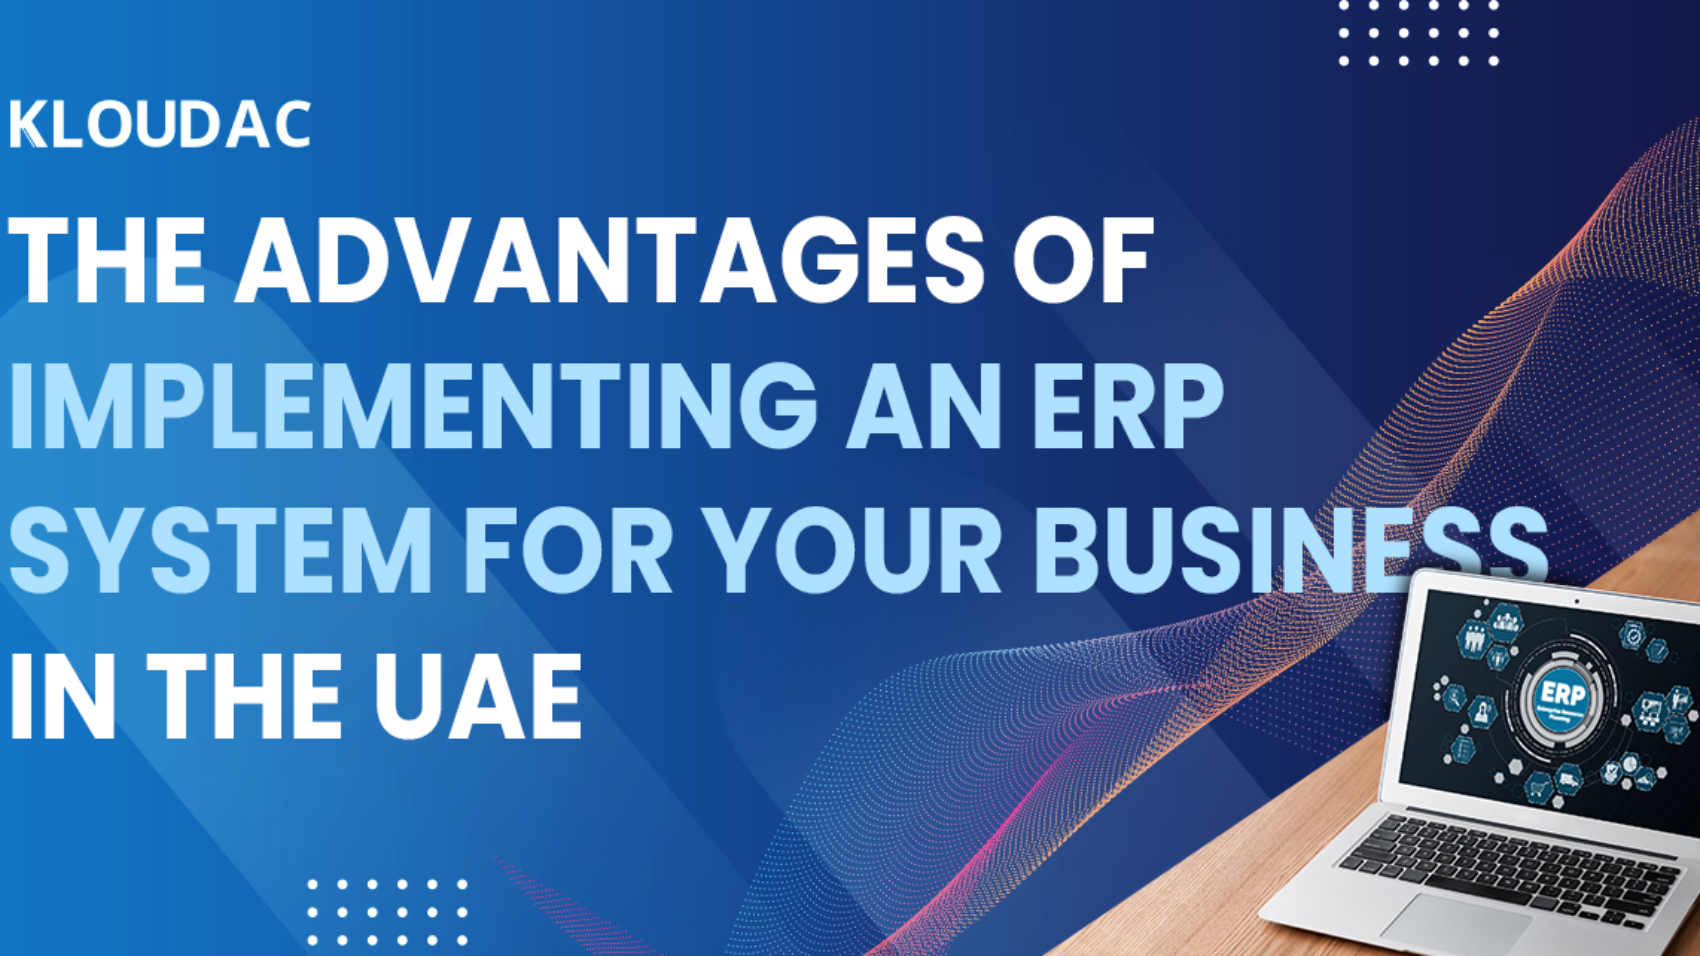 The Advantages of Implementing an ERP System for Your Business in the UAE